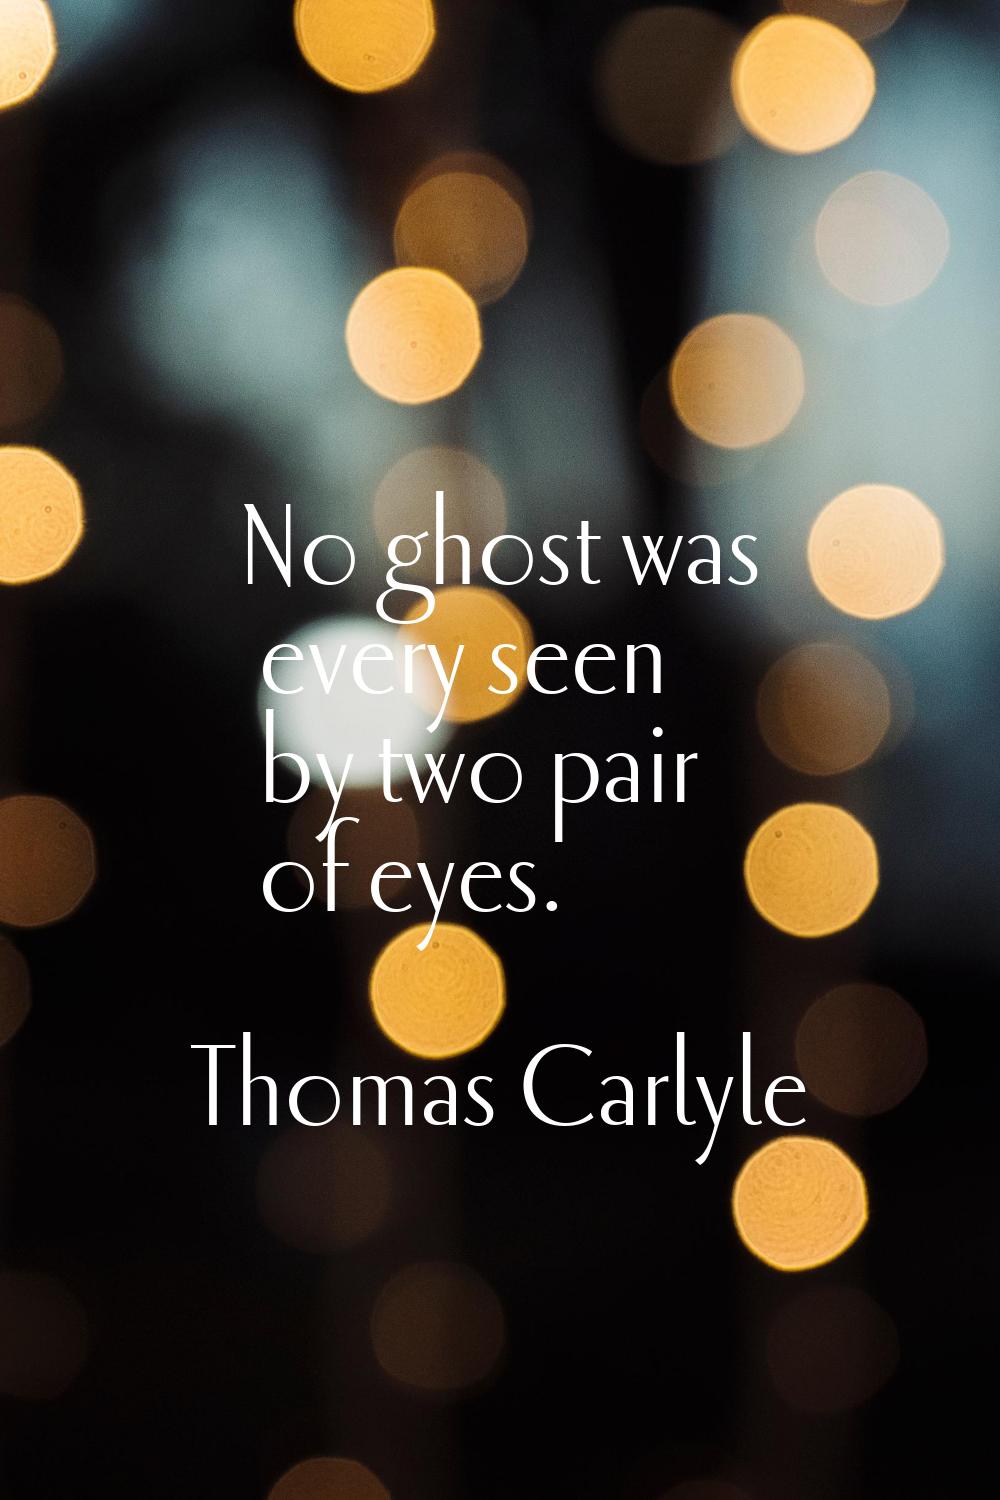 No ghost was every seen by two pair of eyes.